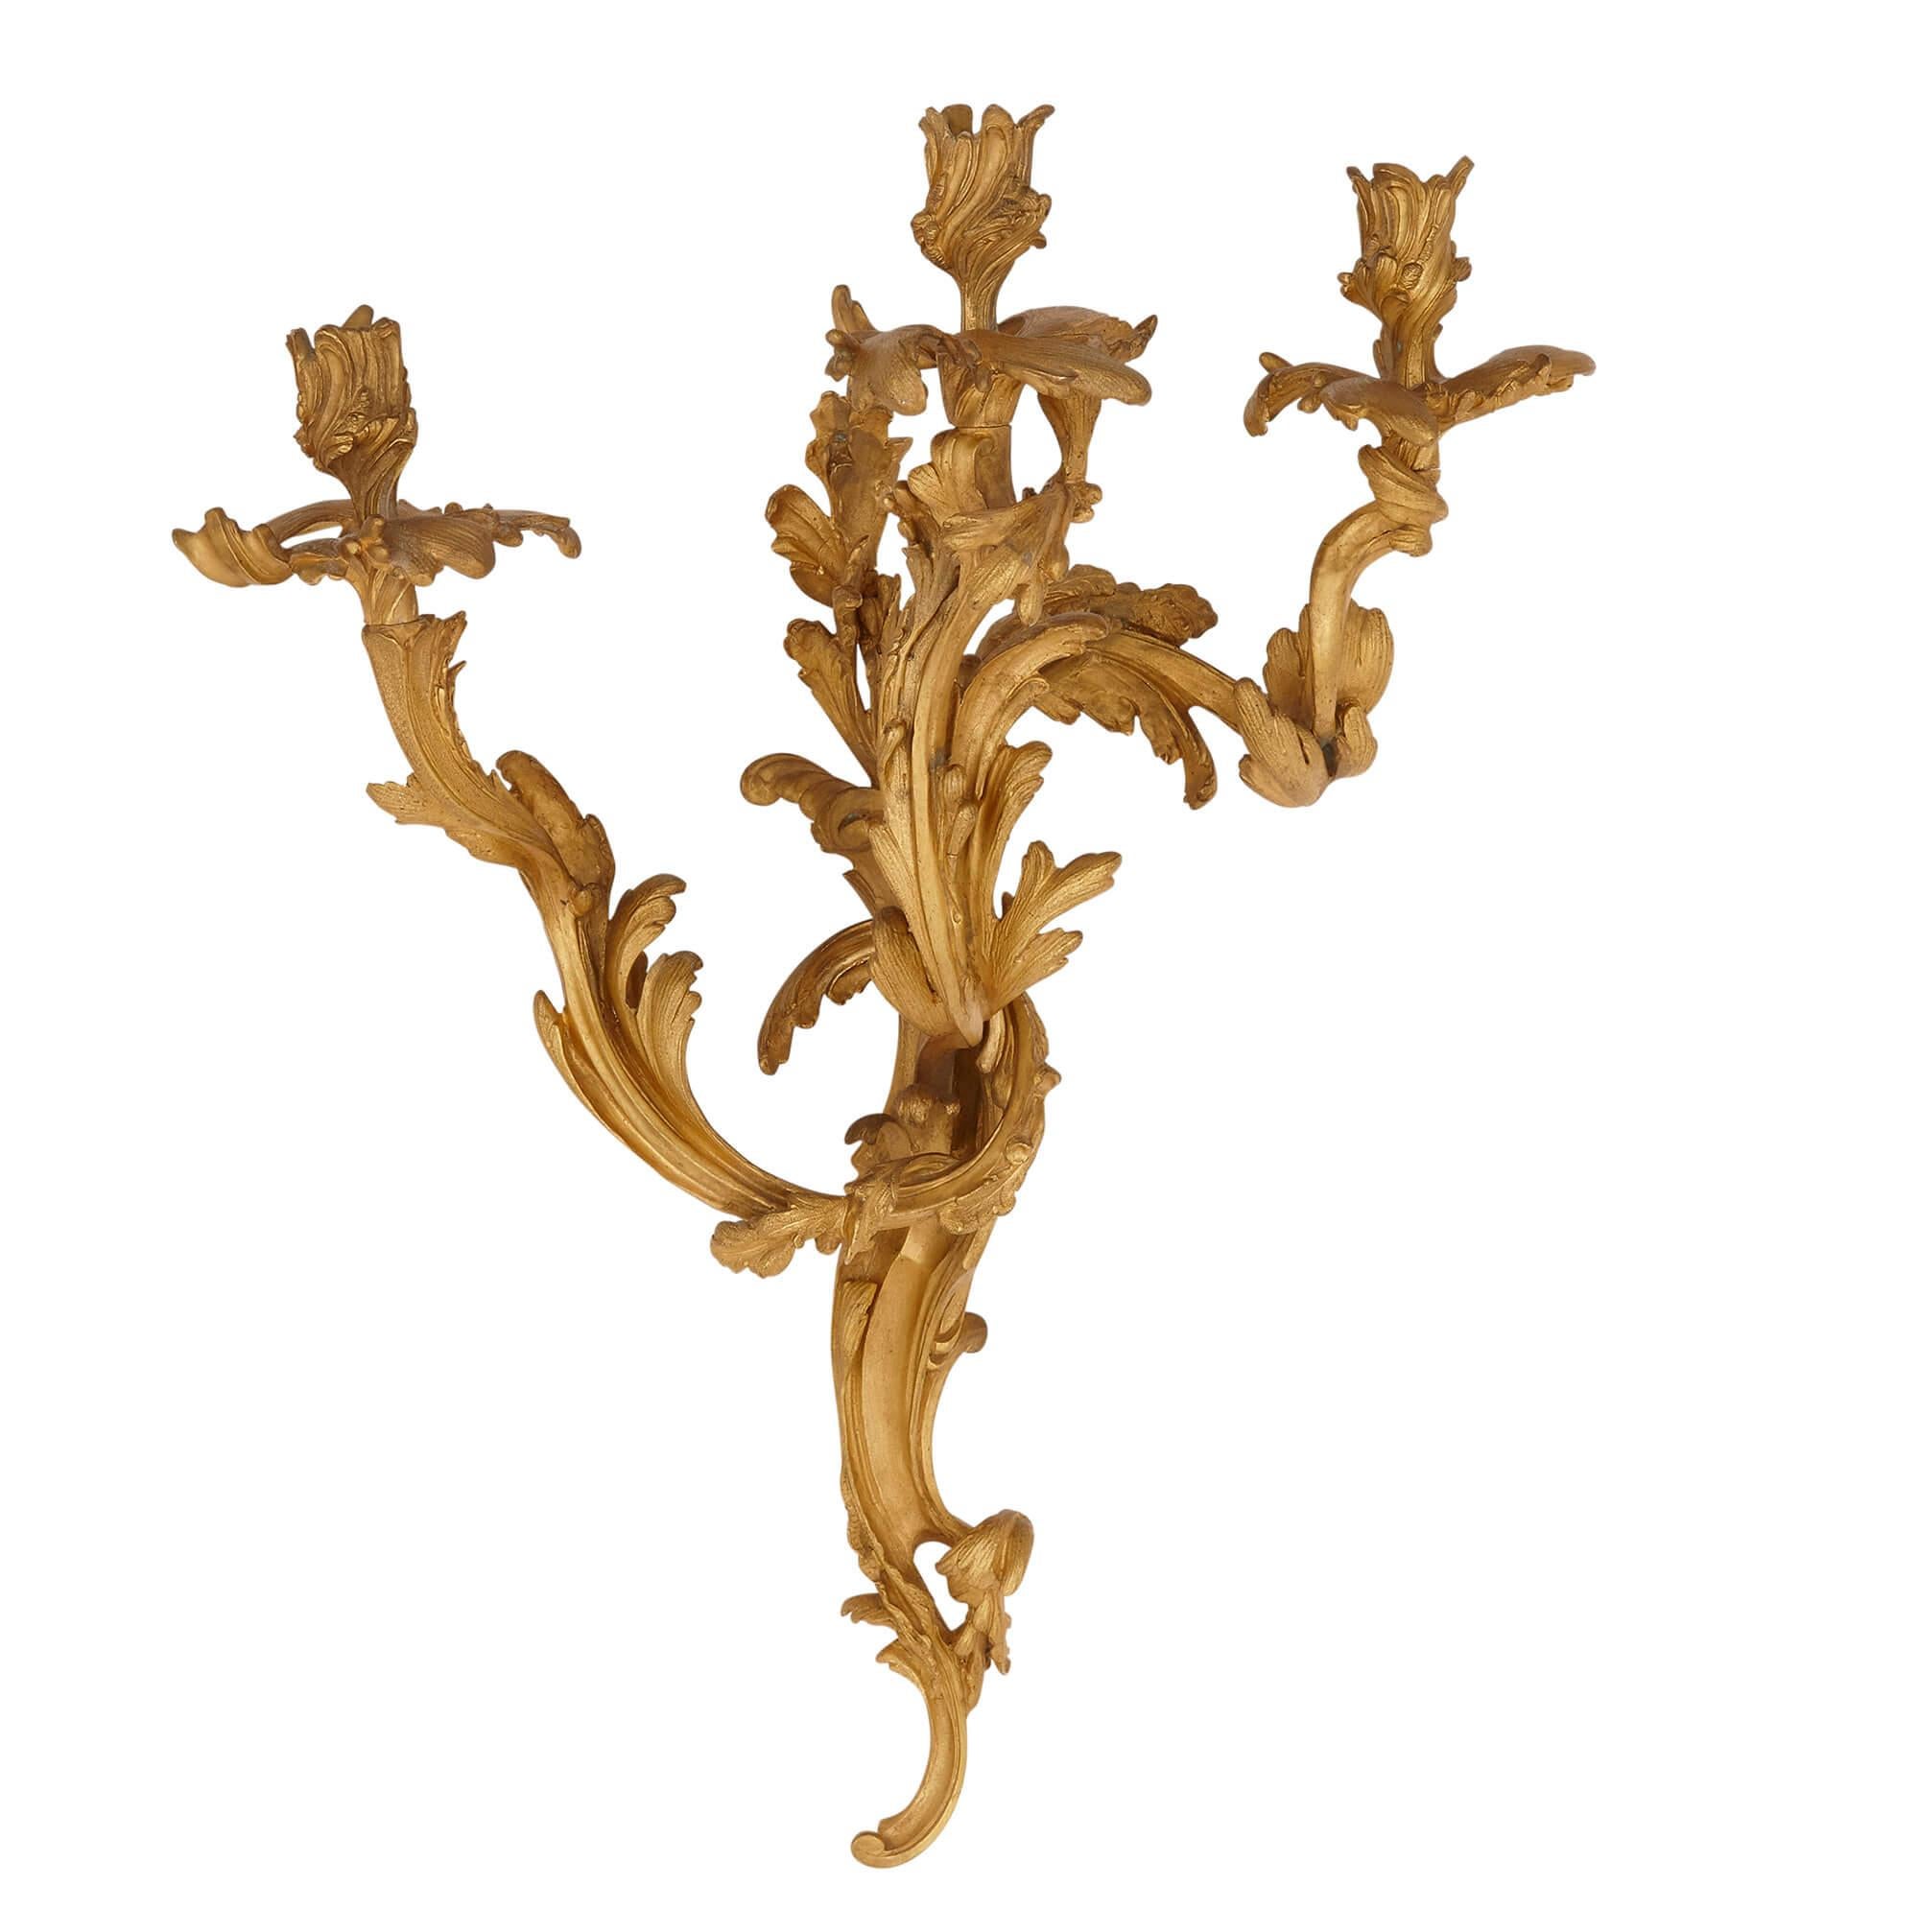 Pair of antique French gilt bronze sconces in the Baroque style
French, late 19th century
Measures: Height 61cm, width 39cm, depth 26cm

The sconces in this pair are wrought from gilt bronze in the Baroque manner. Each sconce features three